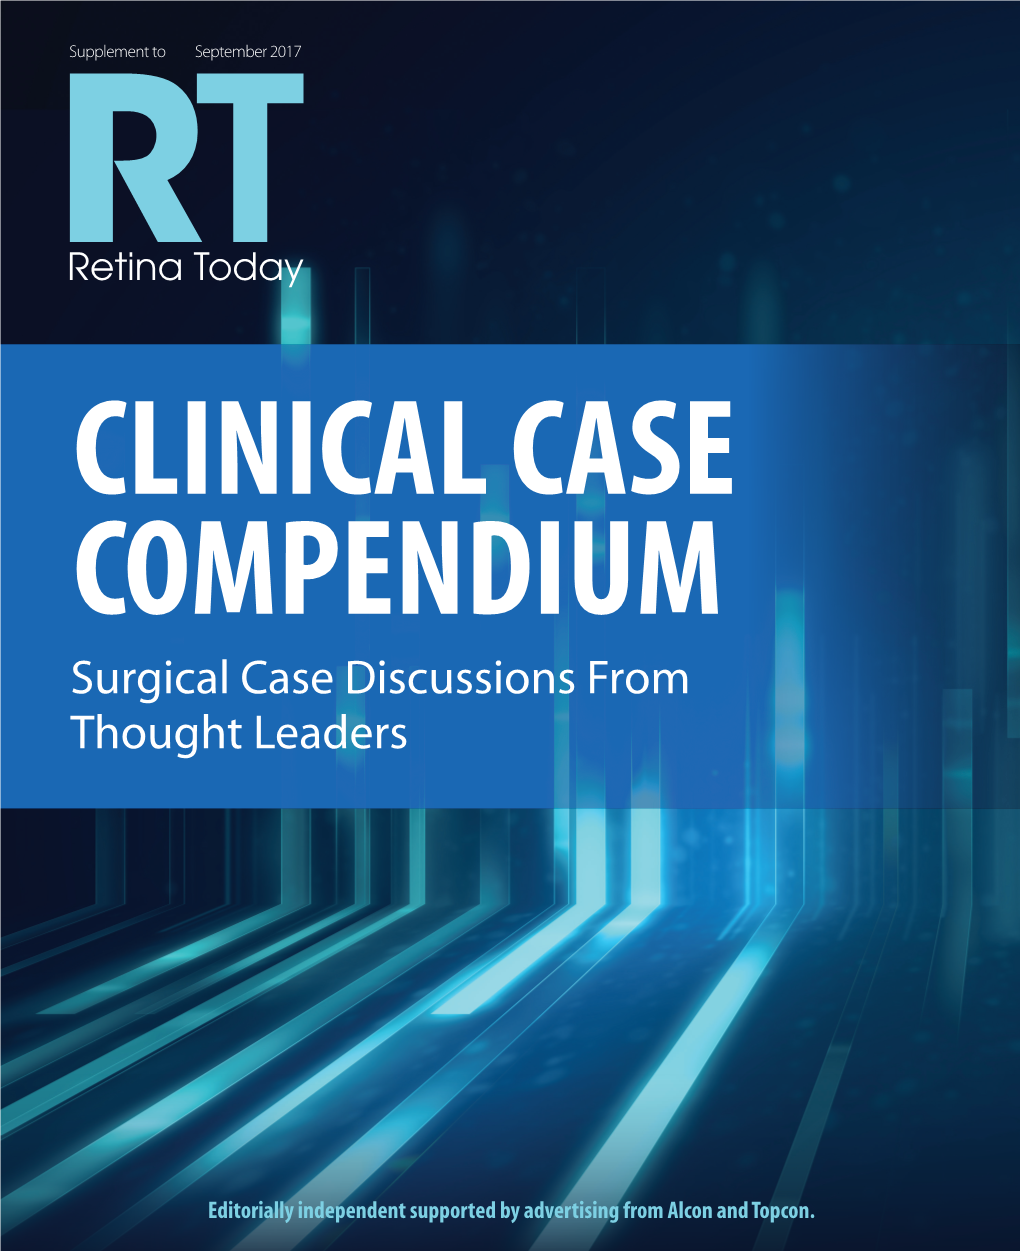 Surgical Case Discussions from Thought Leaders